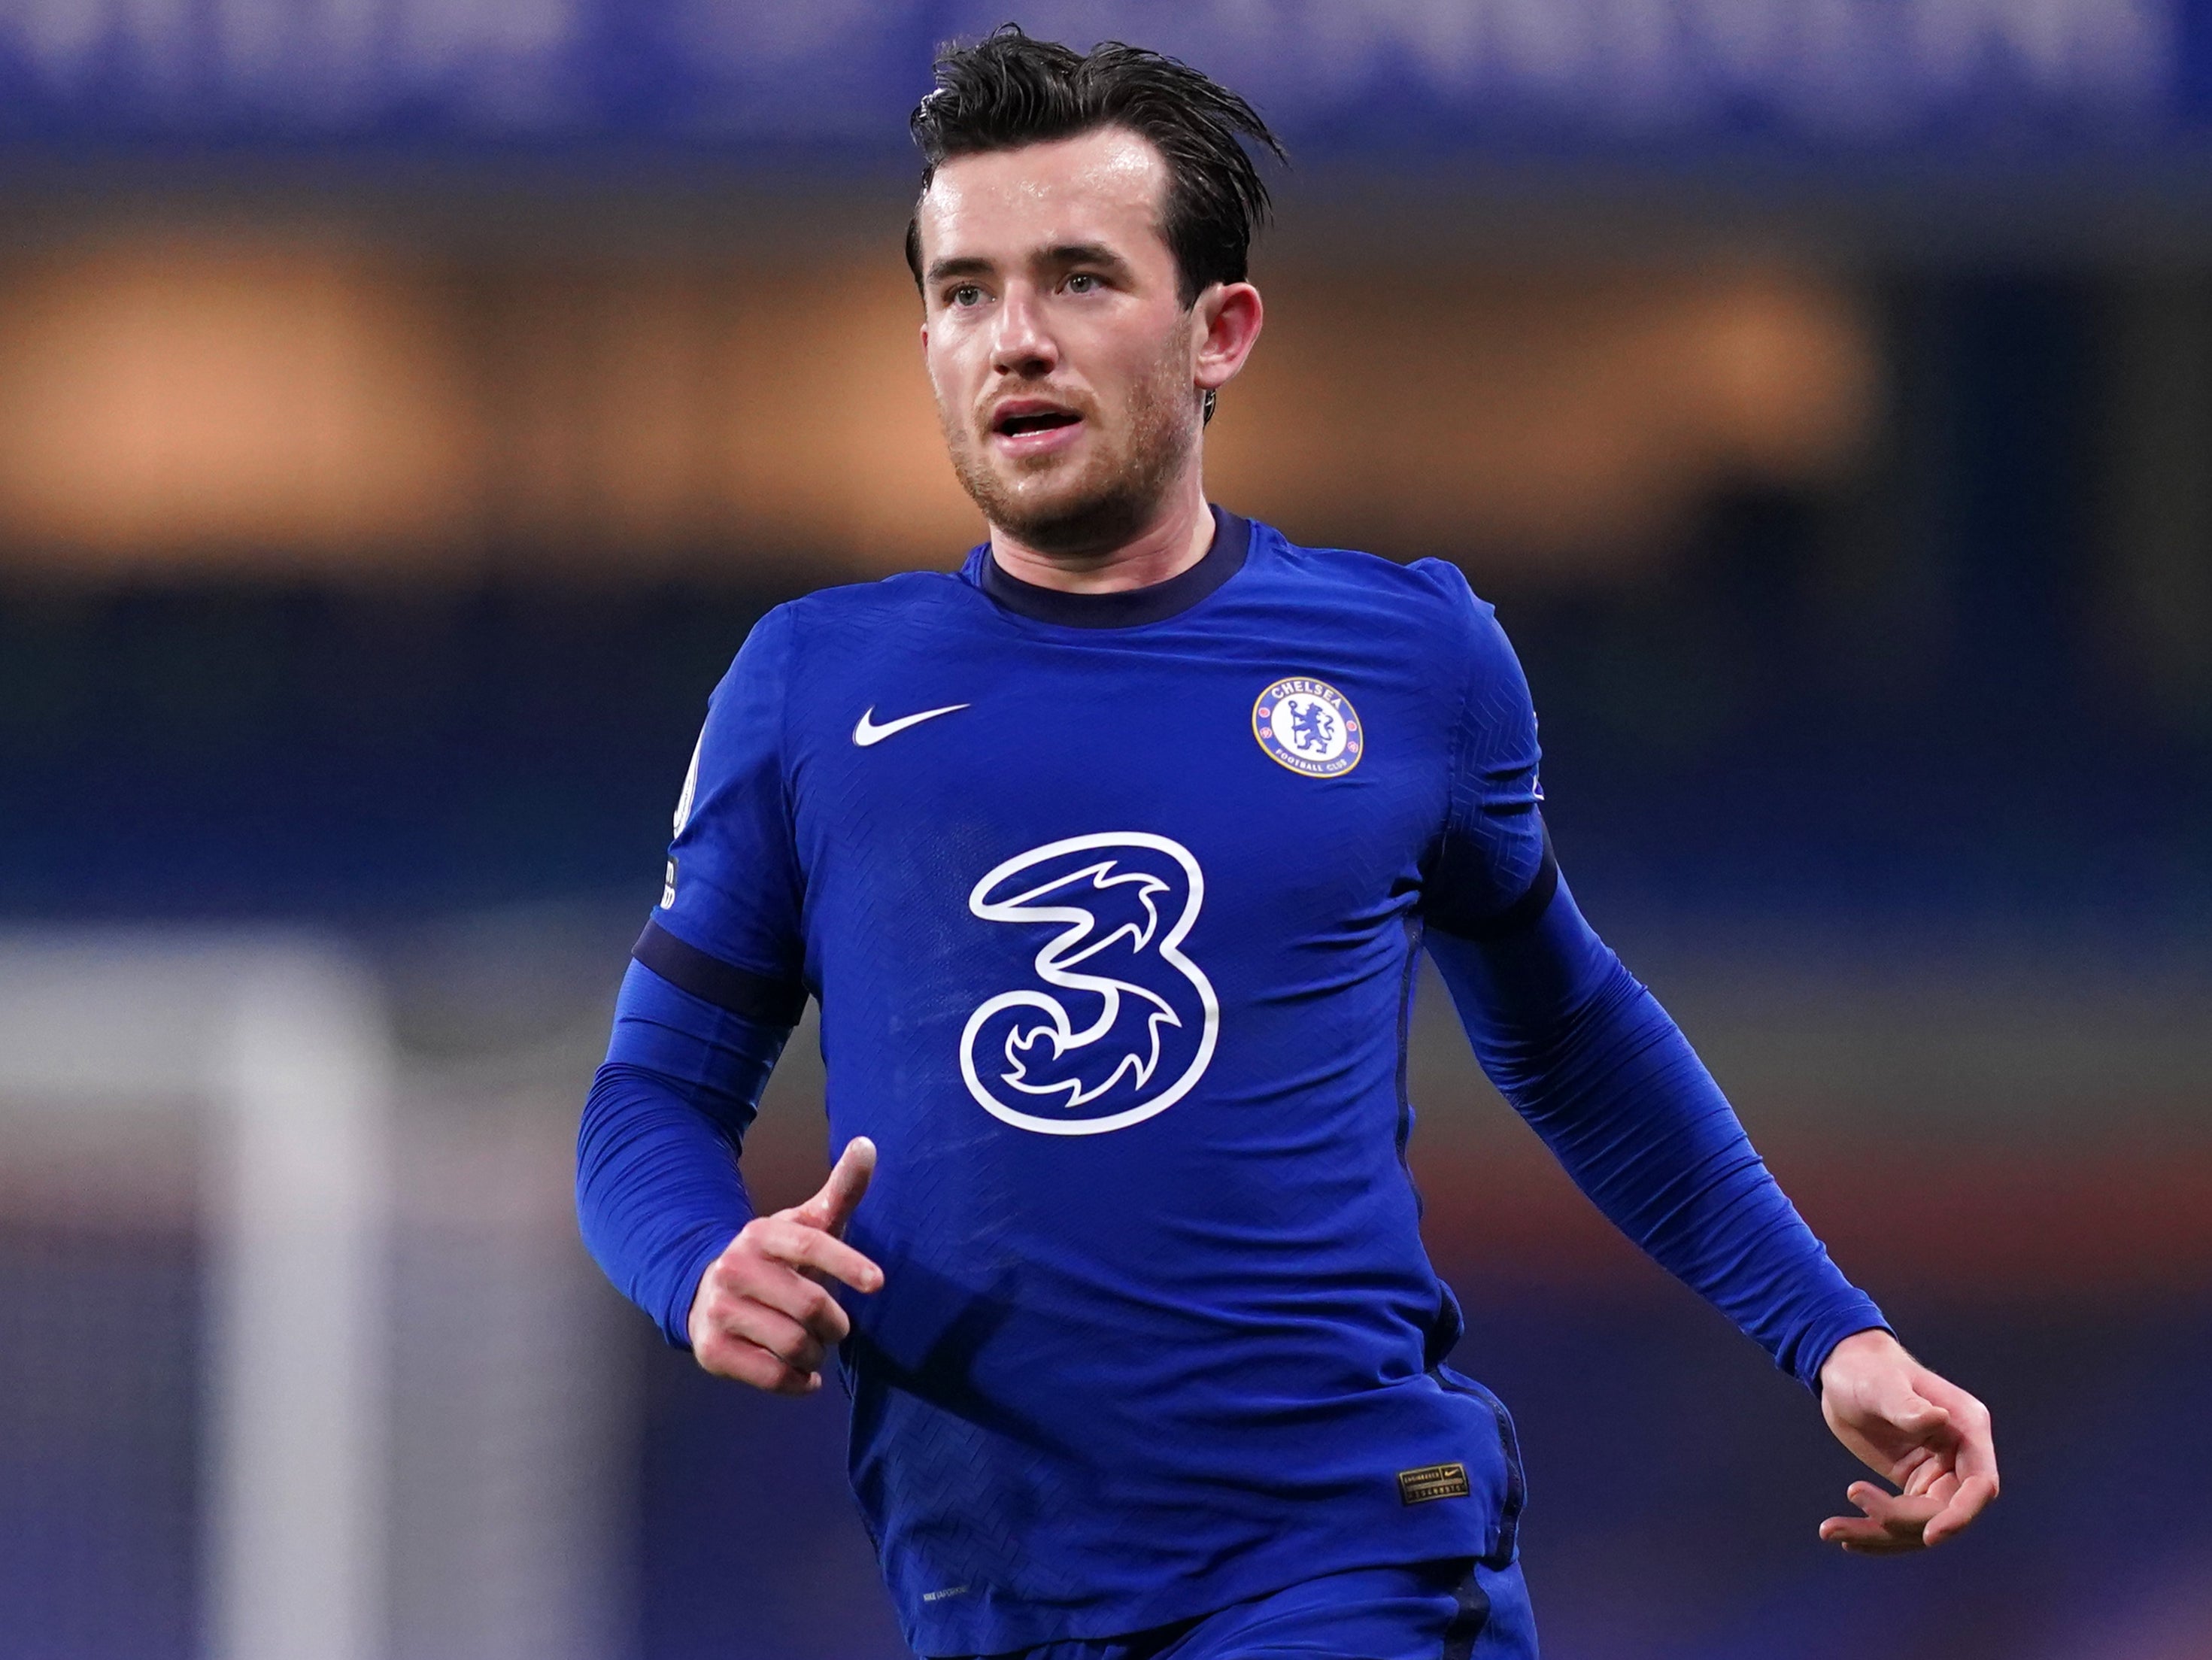 Chilwell heads to the Champions League final with Chelsea this weekend